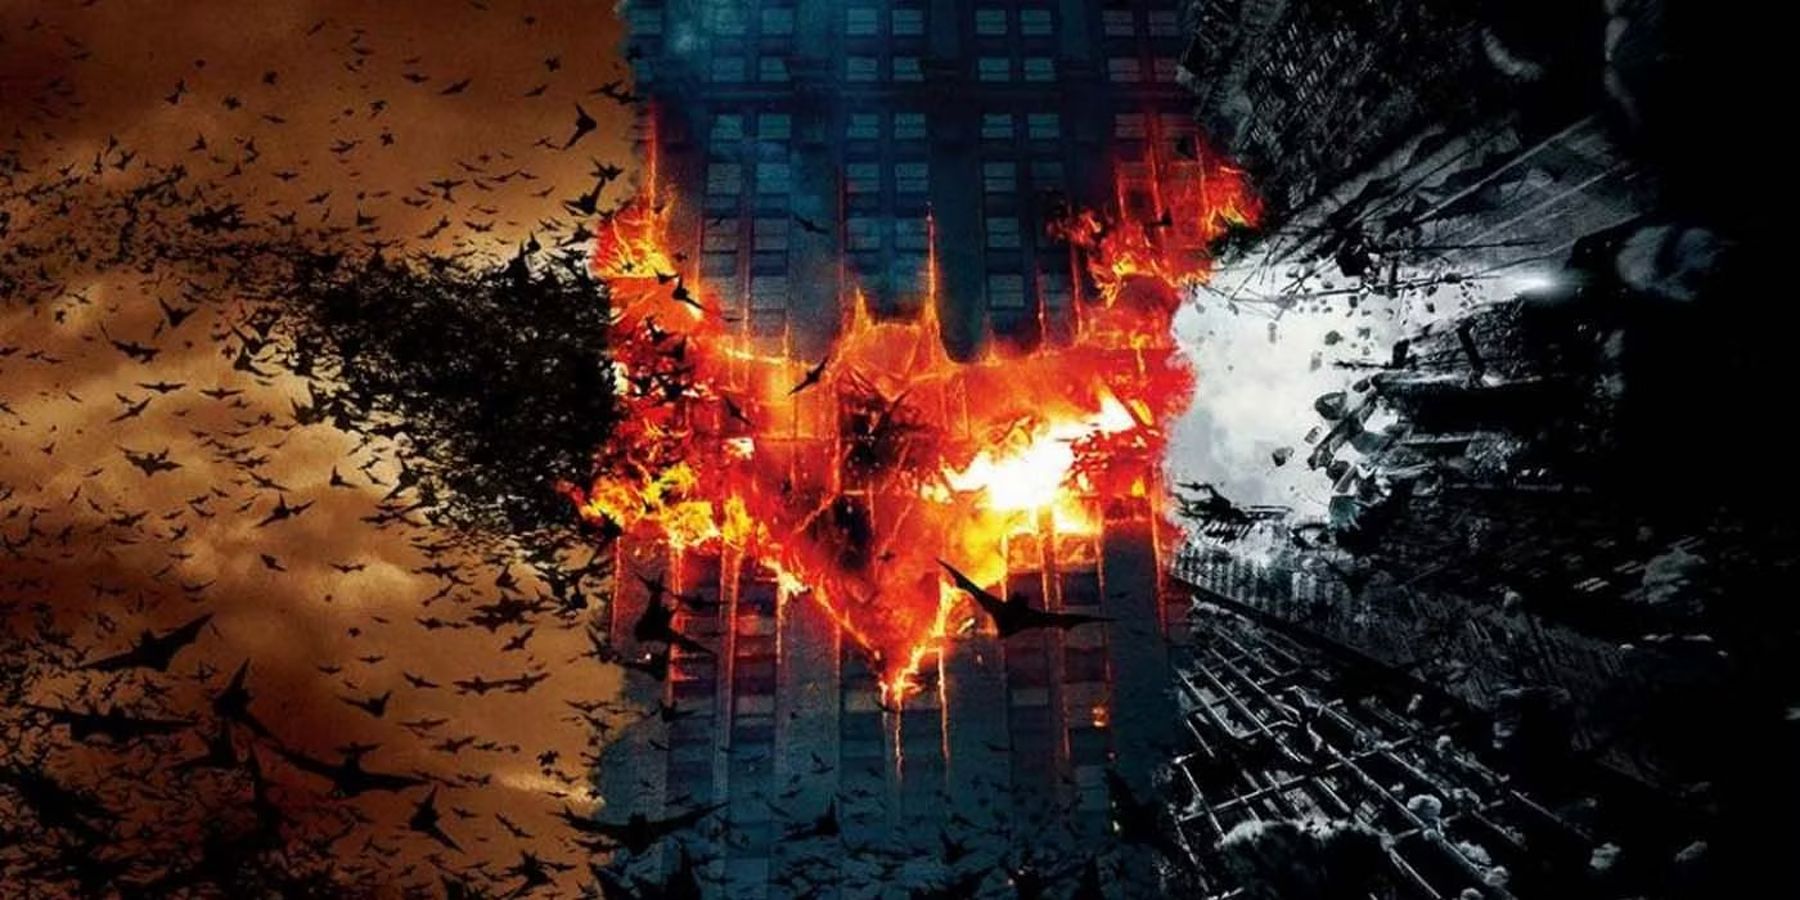 The Dark Knight Trilogy returns to theaters